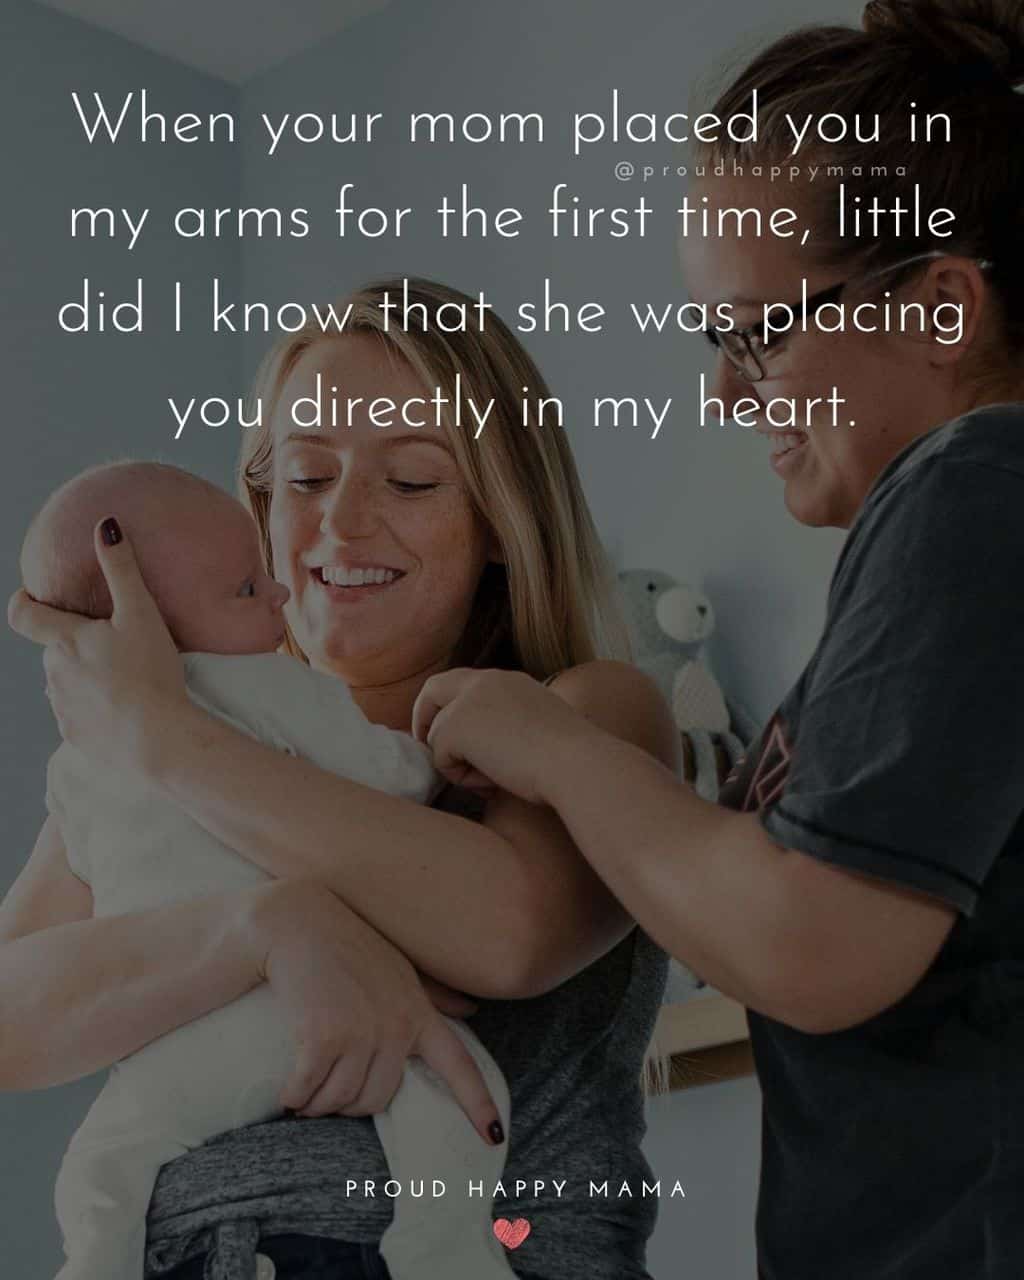 Niece Quotes - When your mom placed you in my arms for the first time, little did I know that she was placing you directly in my heart.